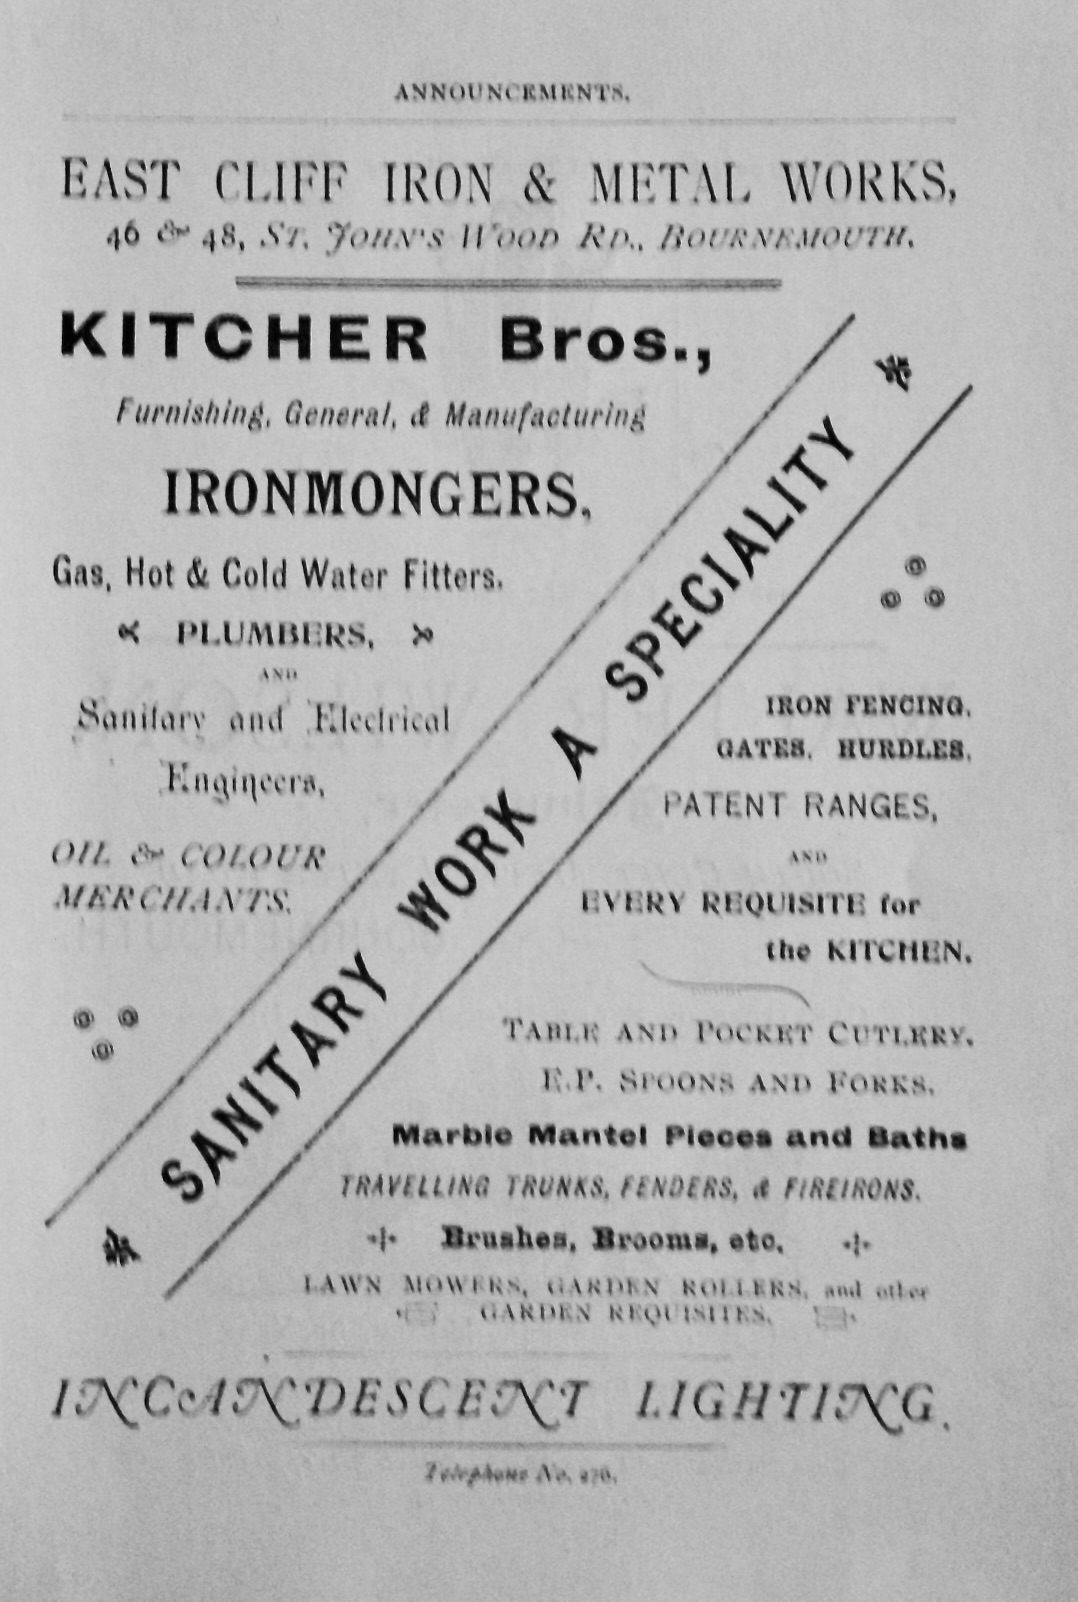 Kitcher Bros., Furnishing, General, & Manufacturing Ironmongers. East Cliff